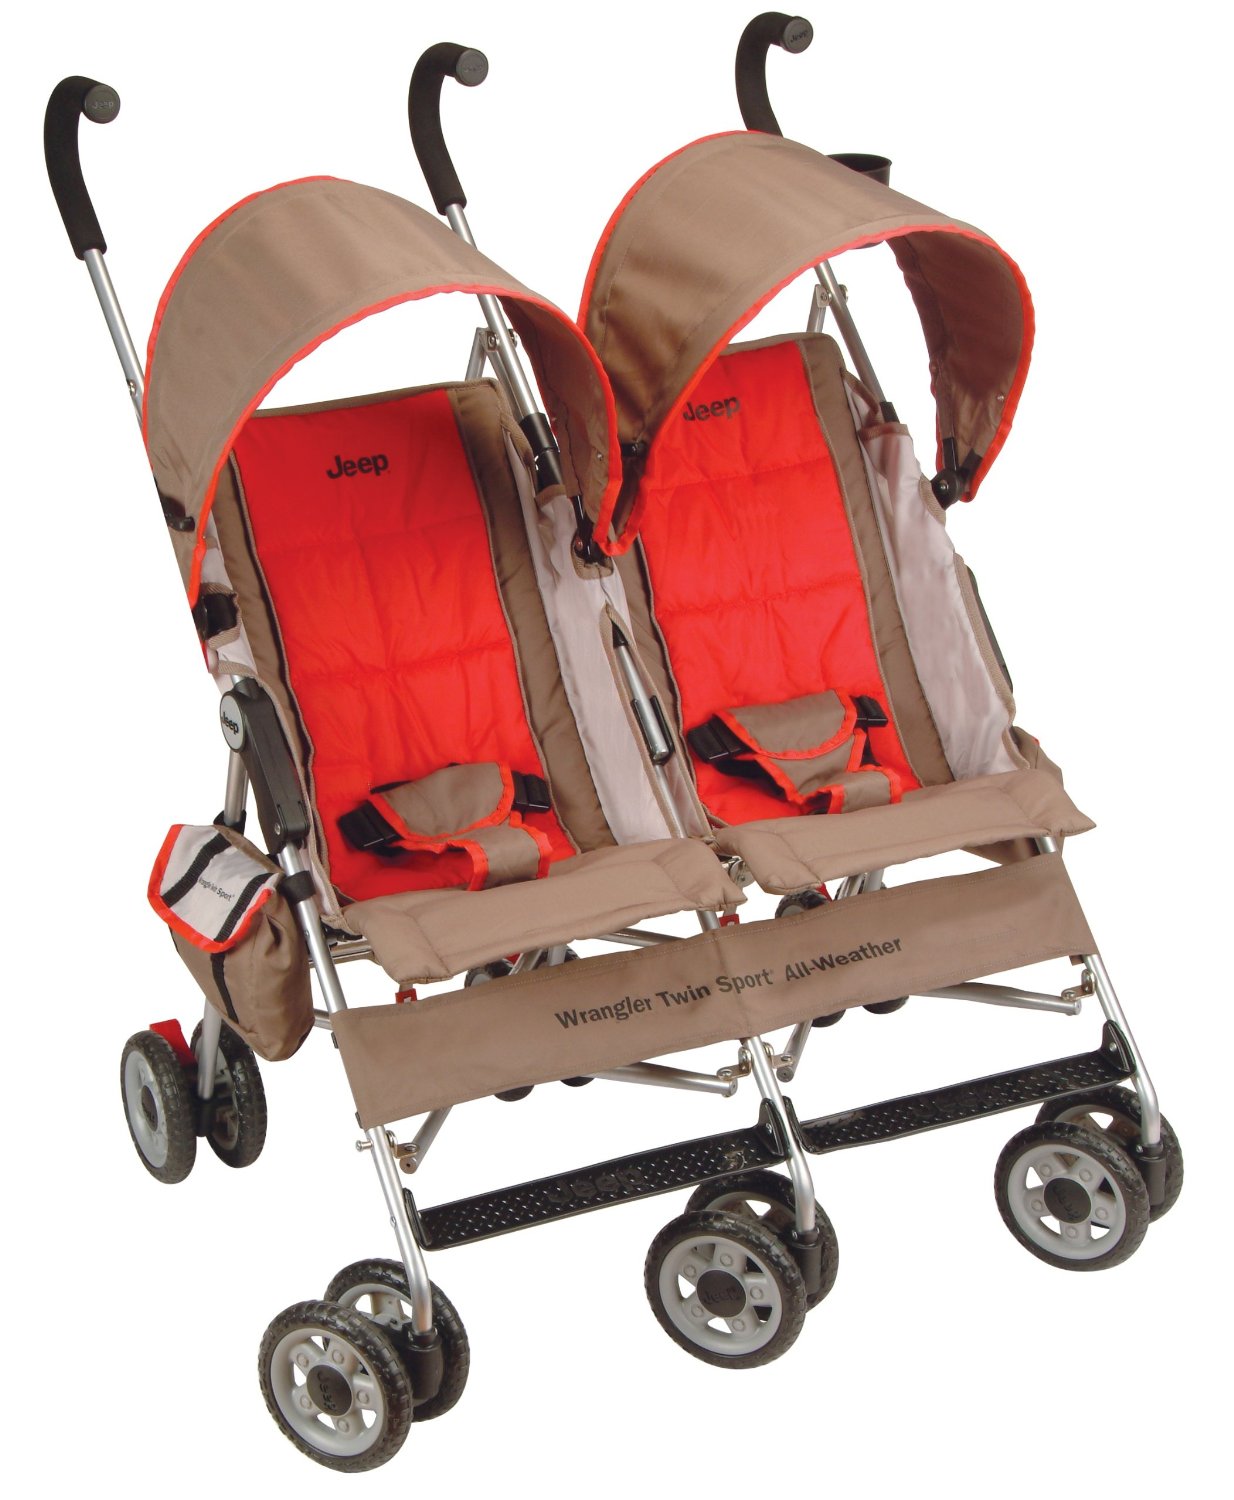 Jeep stroller clearance